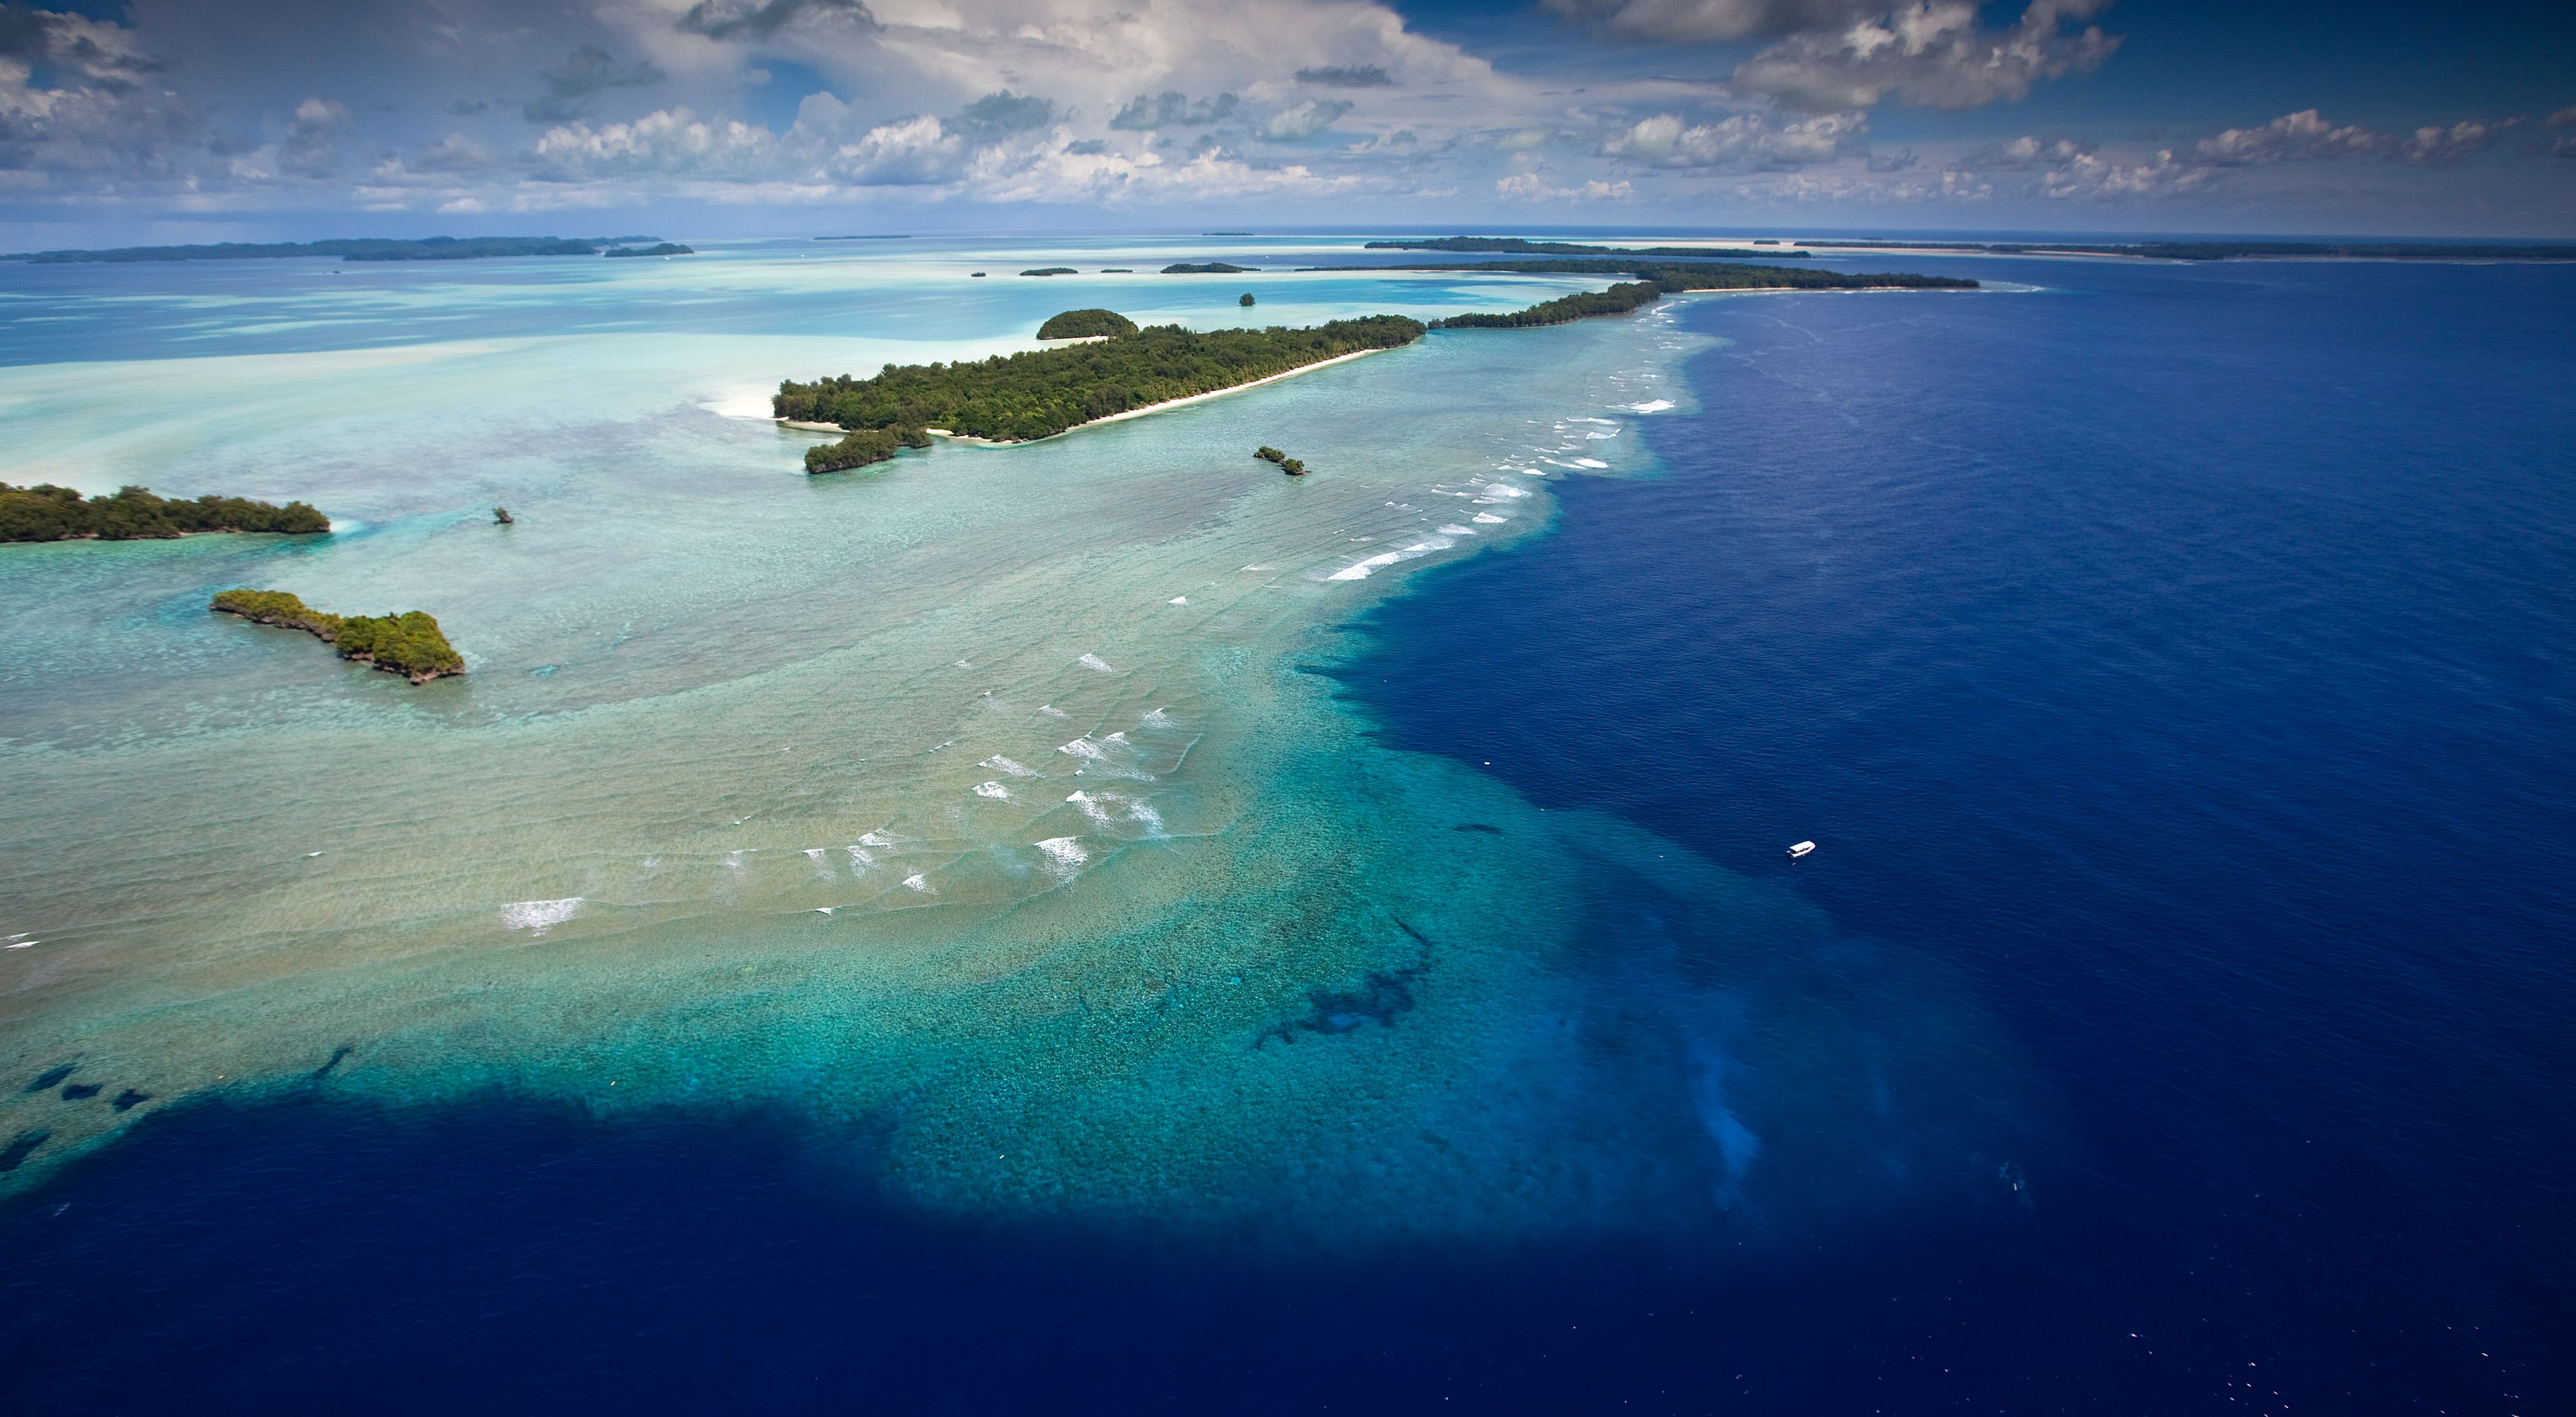 of the area known as the "blue corner" and Rock Islands coral seascape at the Republic of Palau.